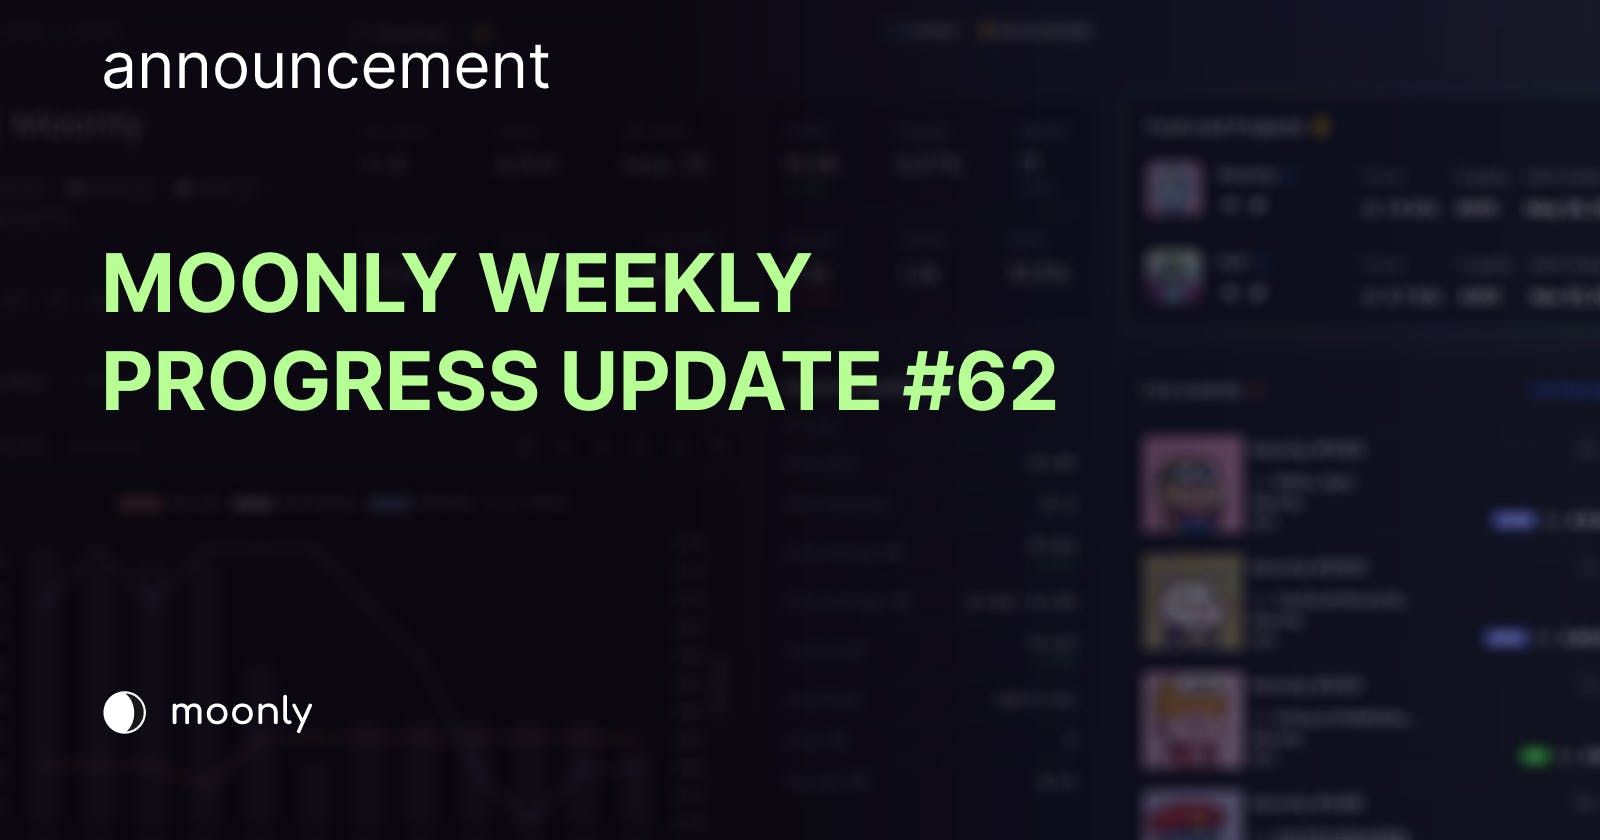 Moonly weekly progress update #62 - Raffle Feature and Twitter Space Giveaway